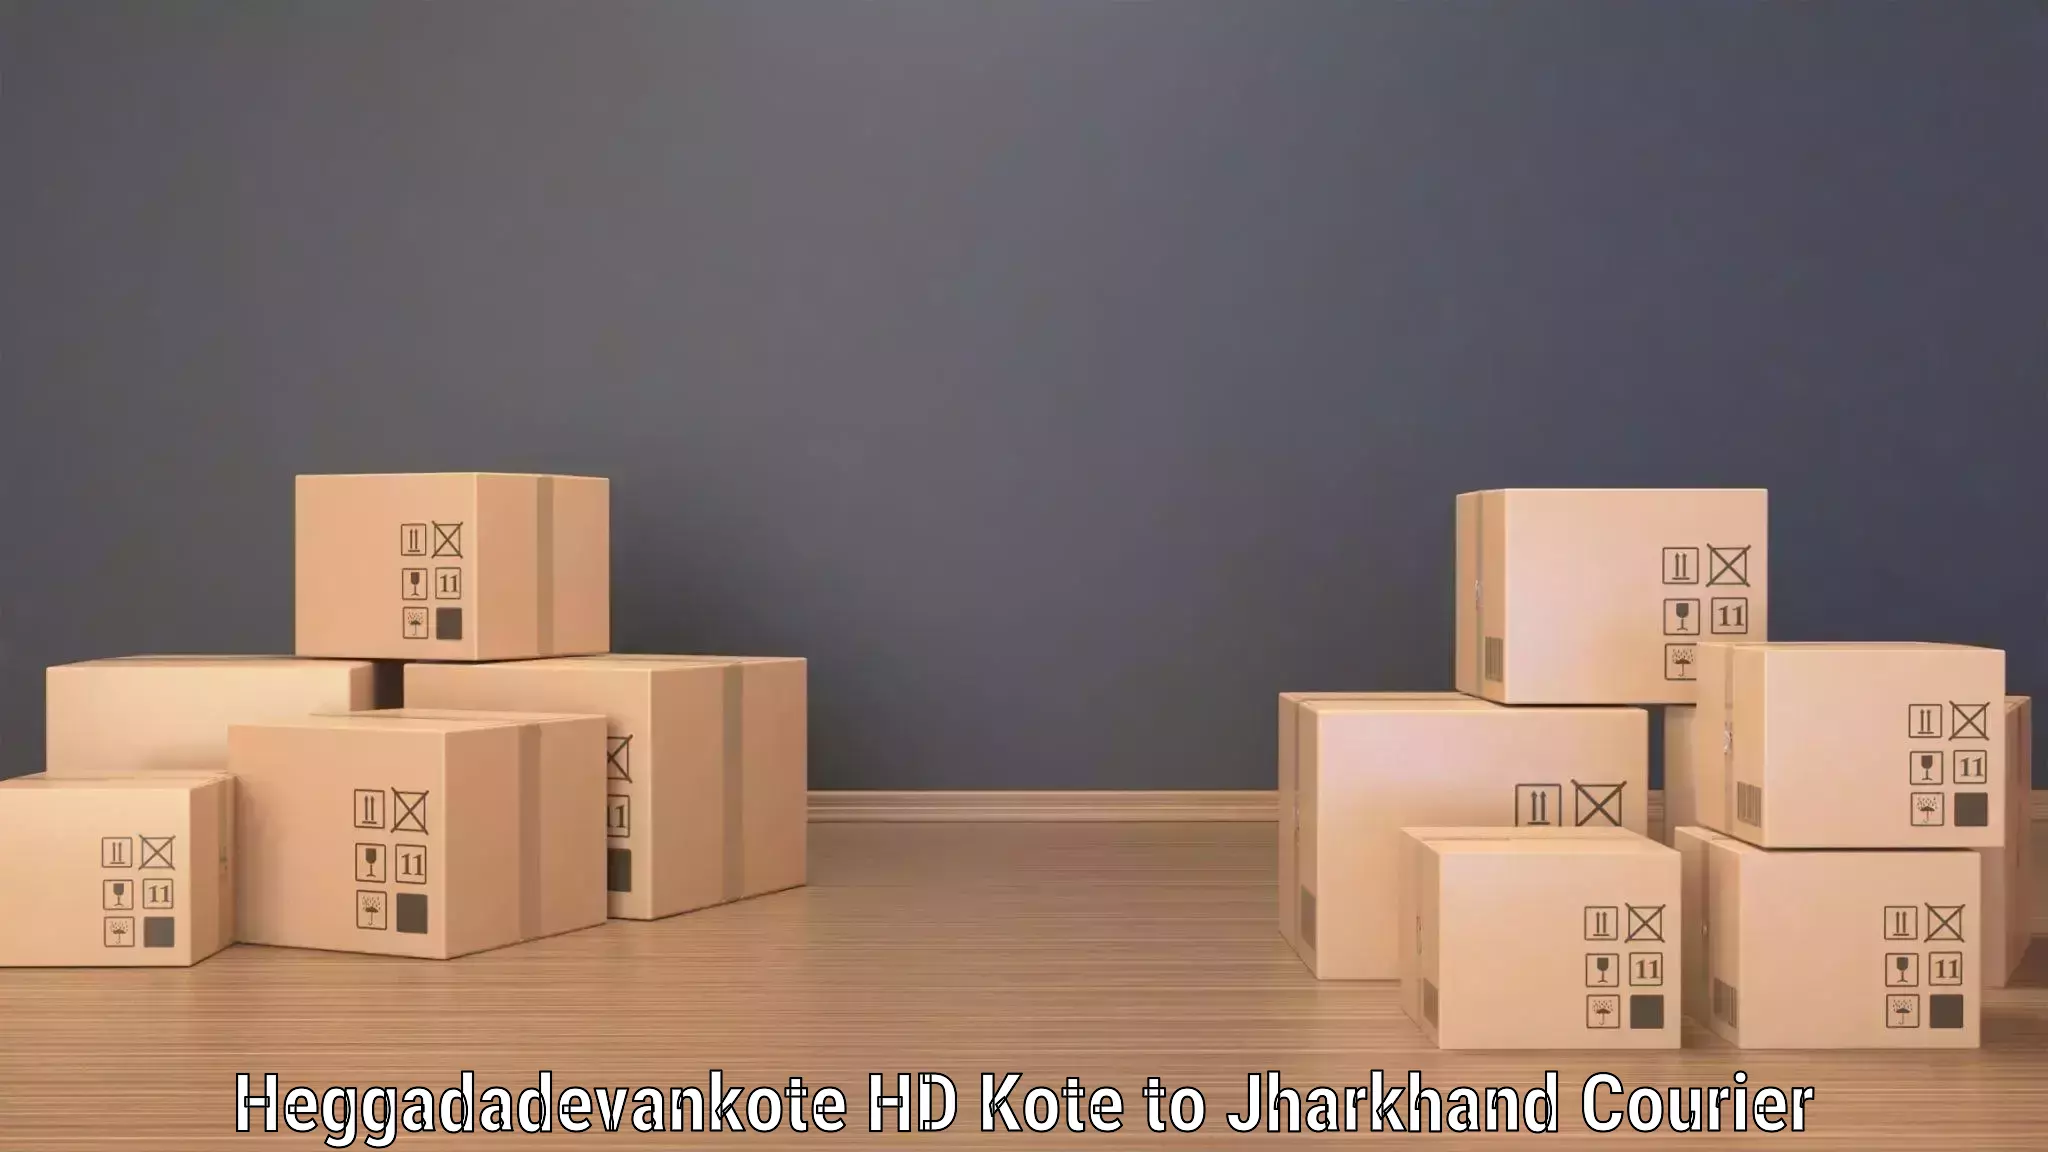 Cost-effective courier options Heggadadevankote HD Kote to Topchanchi